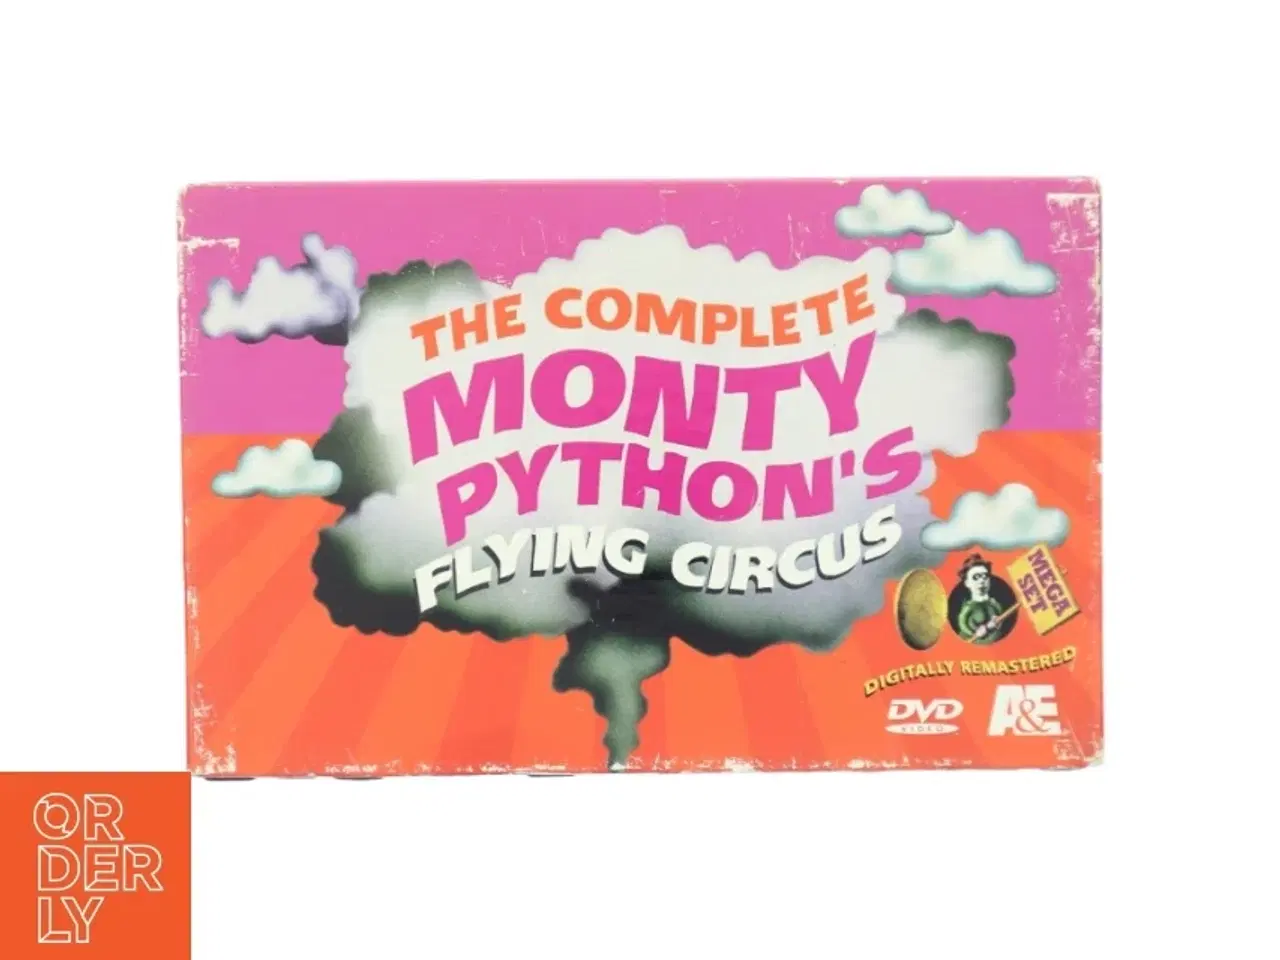 Billede 1 - The complete Monty Python´s flying circus